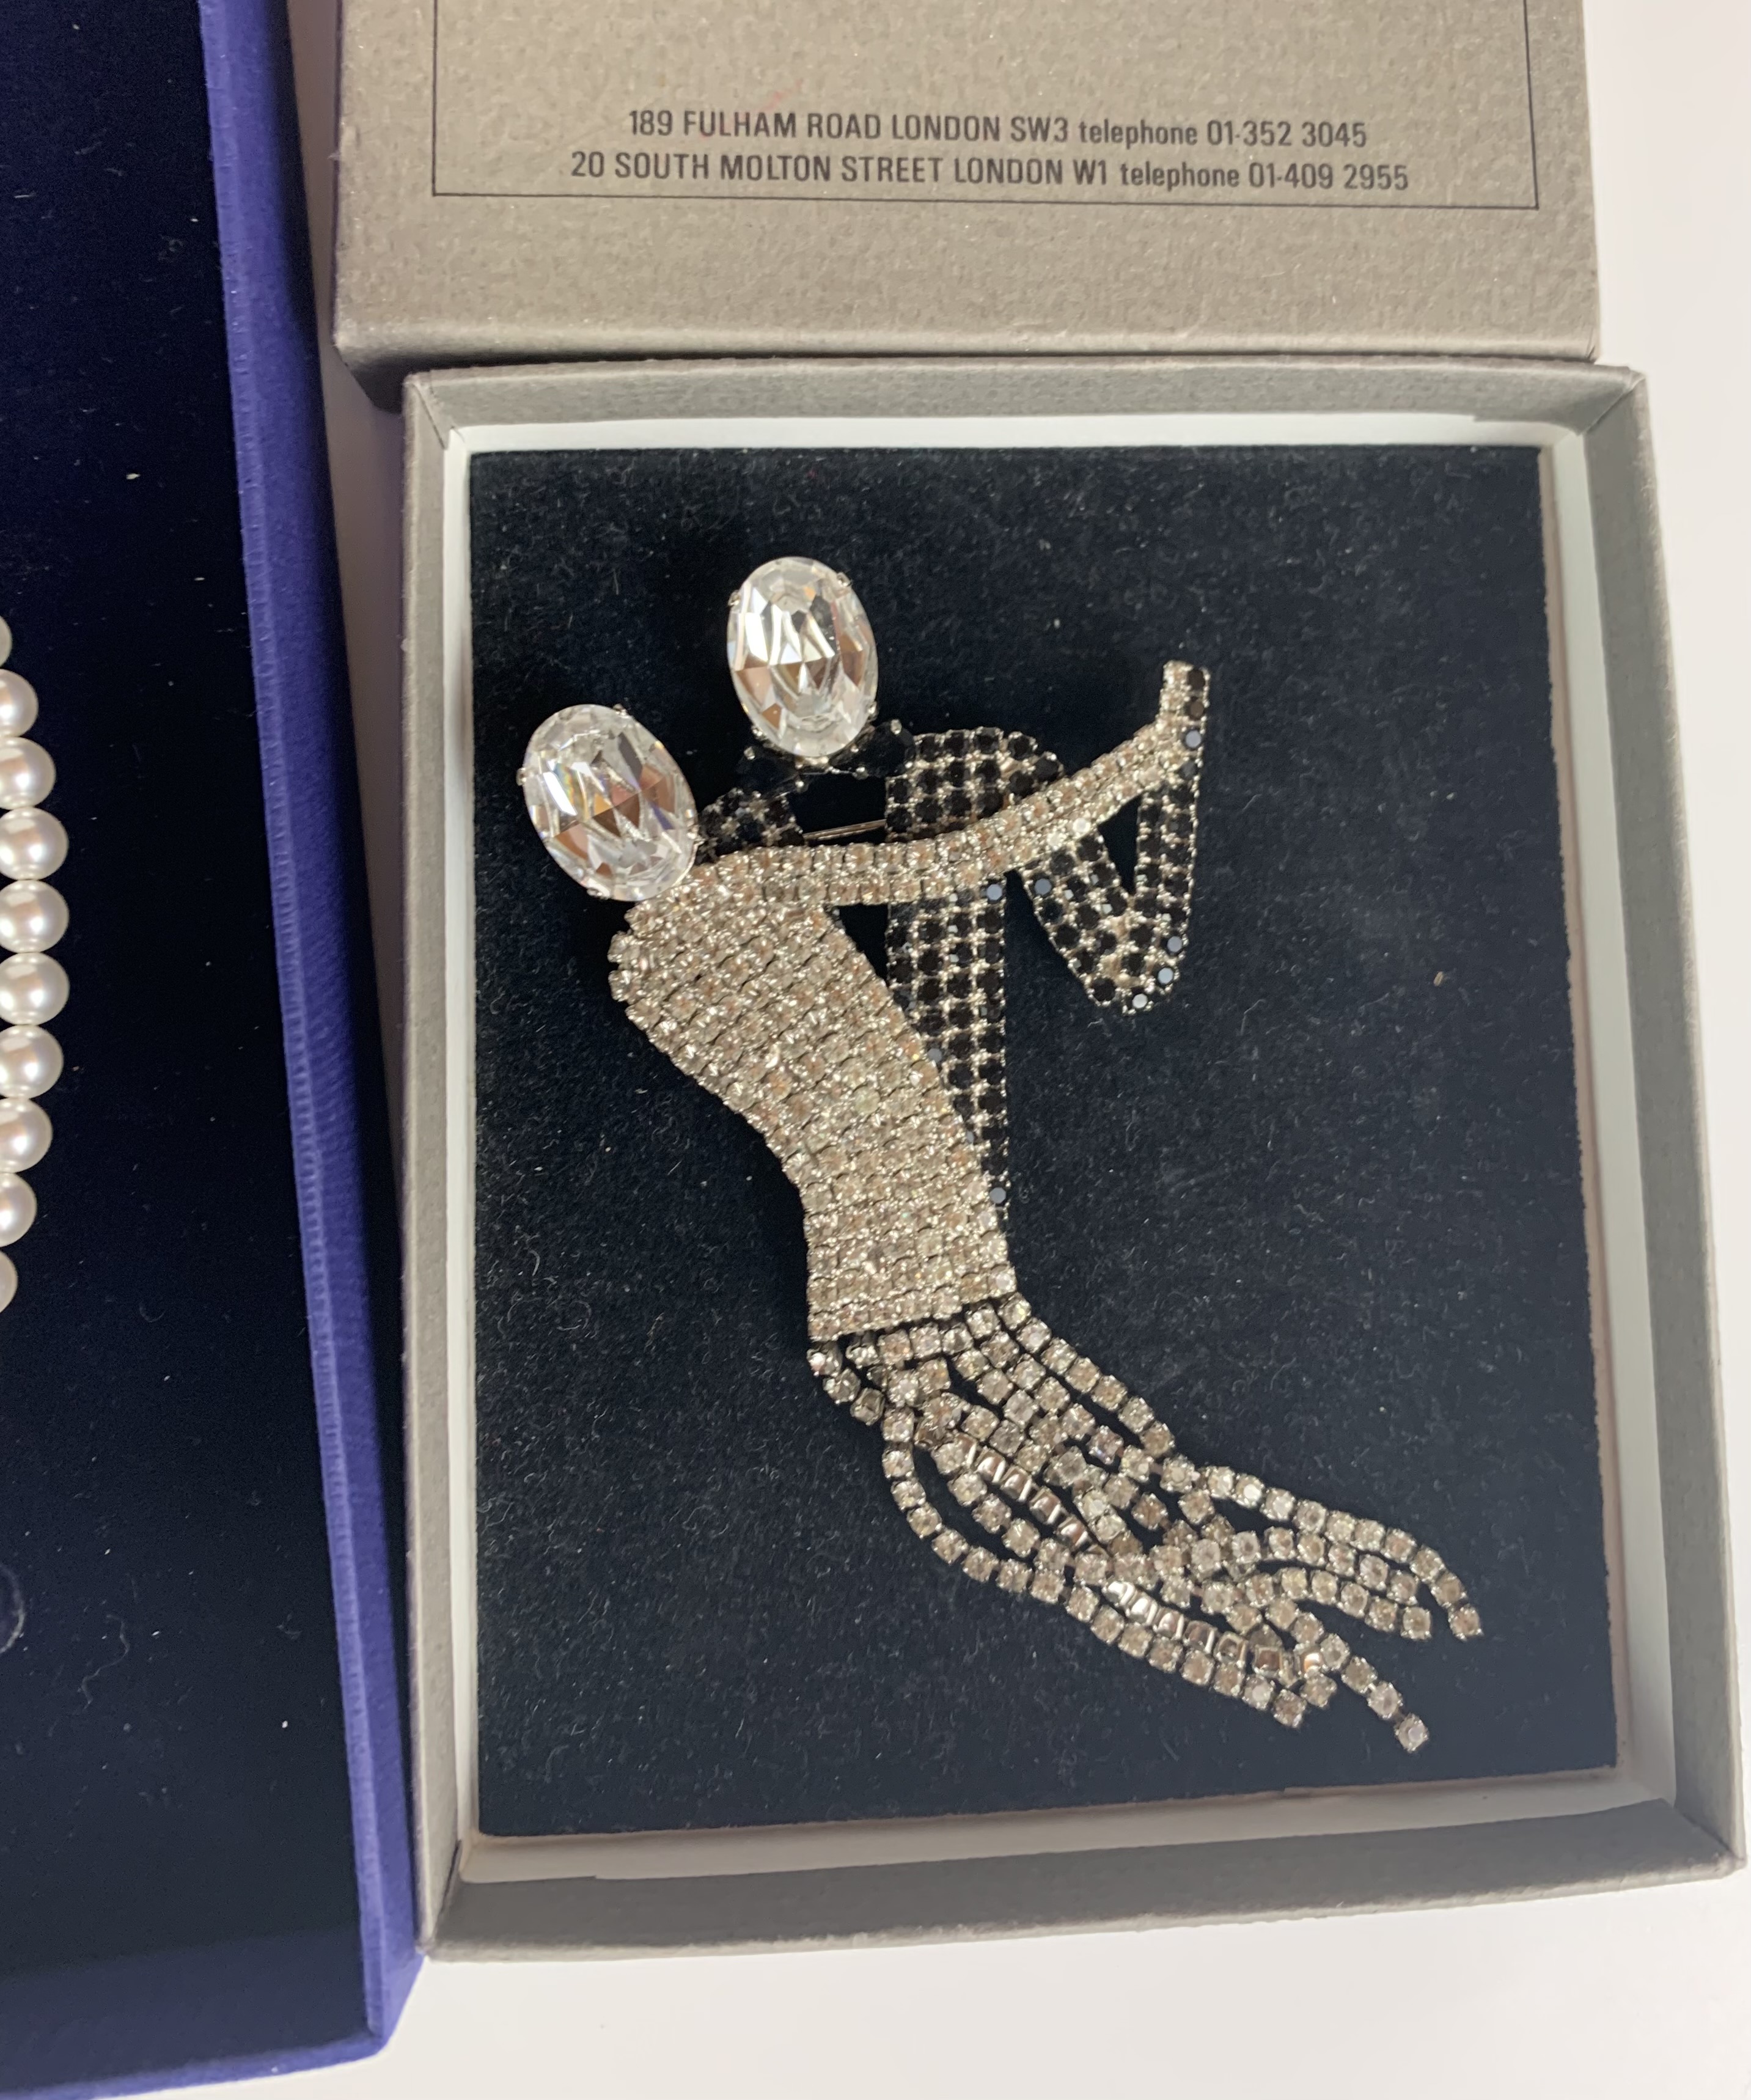 Boxed Swarovski and pearl necklace, boxed Butler & Wilson dancing couples brooch (length 5”) and - Image 4 of 5